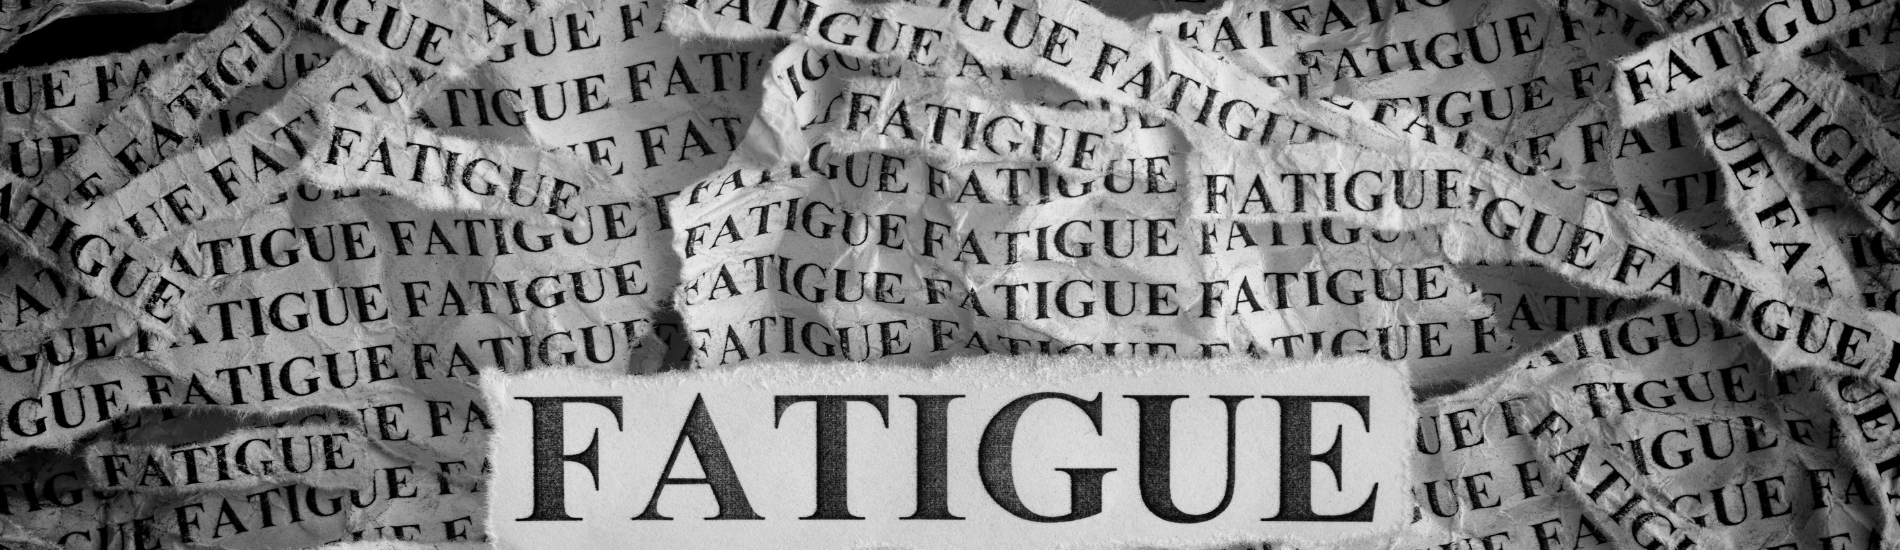 The Story Behind “Fatigue” – The History & Origin of the Word